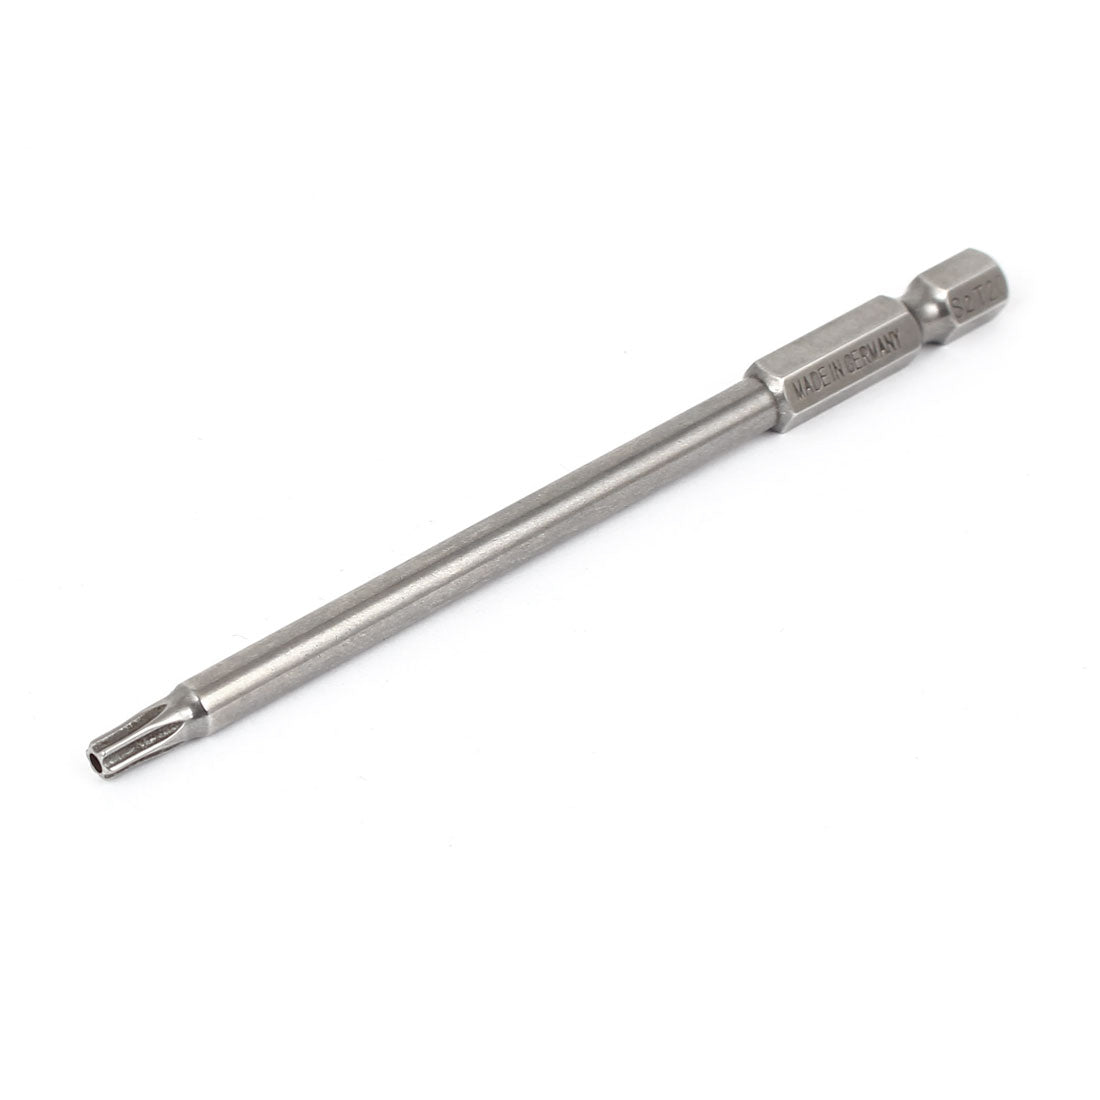 Uxcell Uxcell 100mm Length 1/4" Hex Shank T15 Magnetic Torx Security Screwdriver Bits